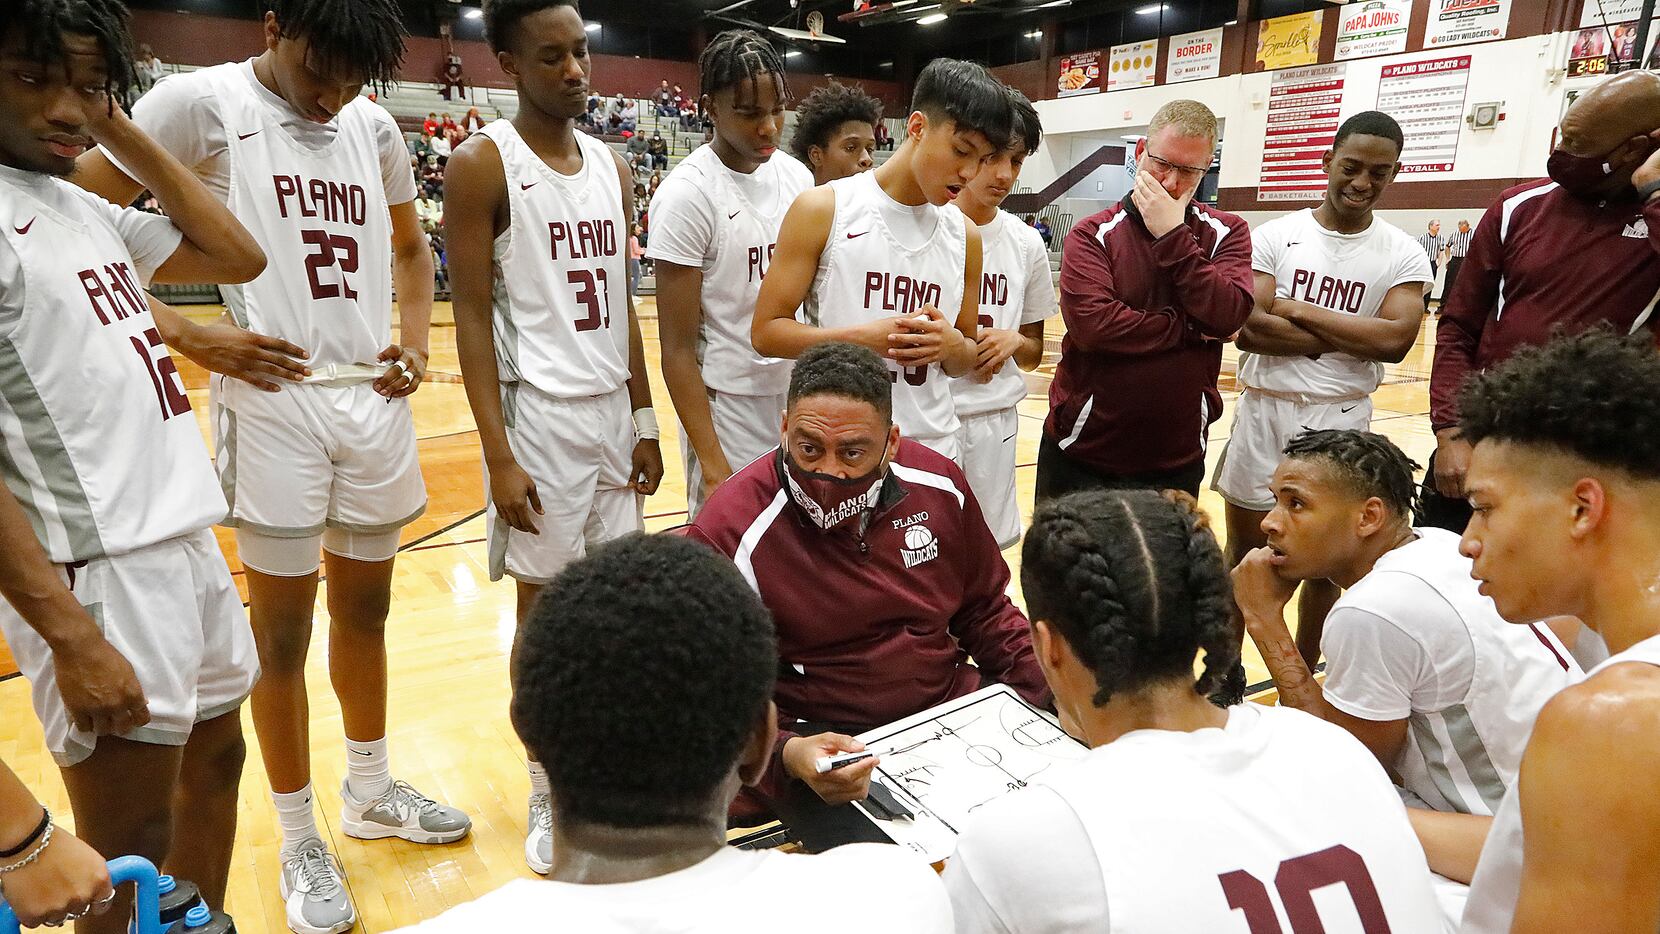 Plano Senior High School head coach Dean Christian draws up a play during a time out in the...